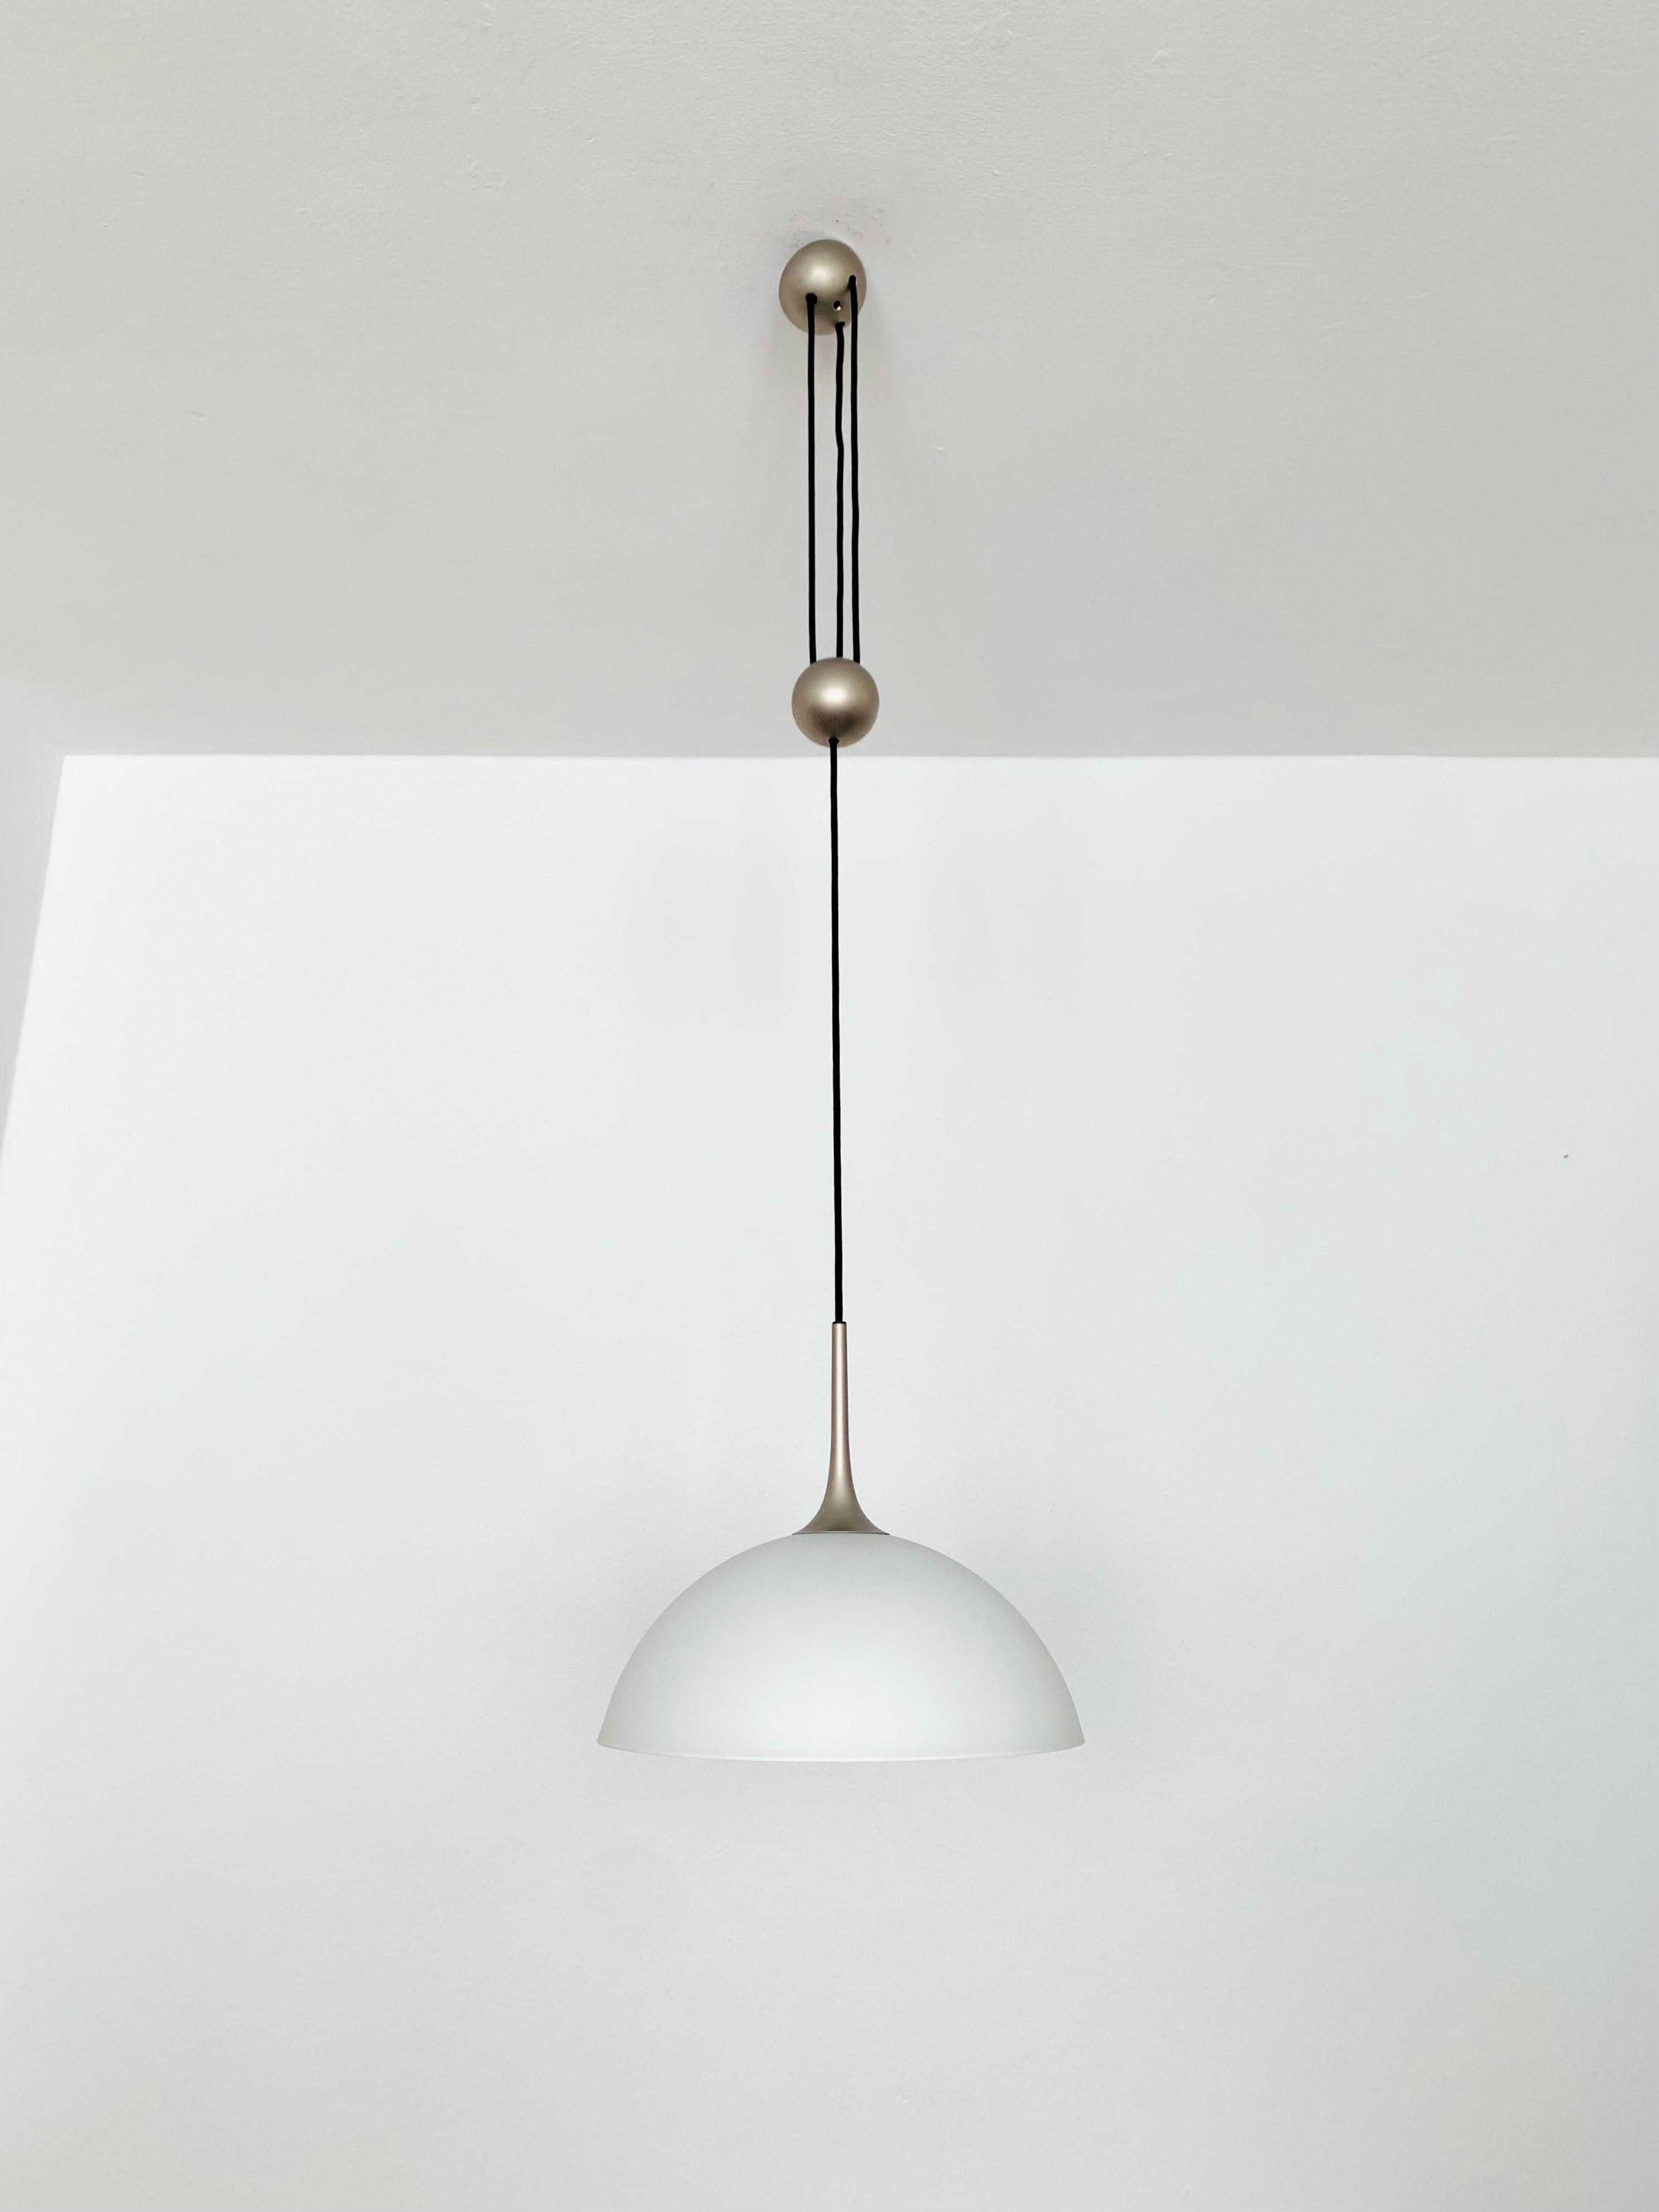 Opaline Posa 36 Pendant Lamp with Counterweight by Florian Schulz In Good Condition For Sale In München, DE